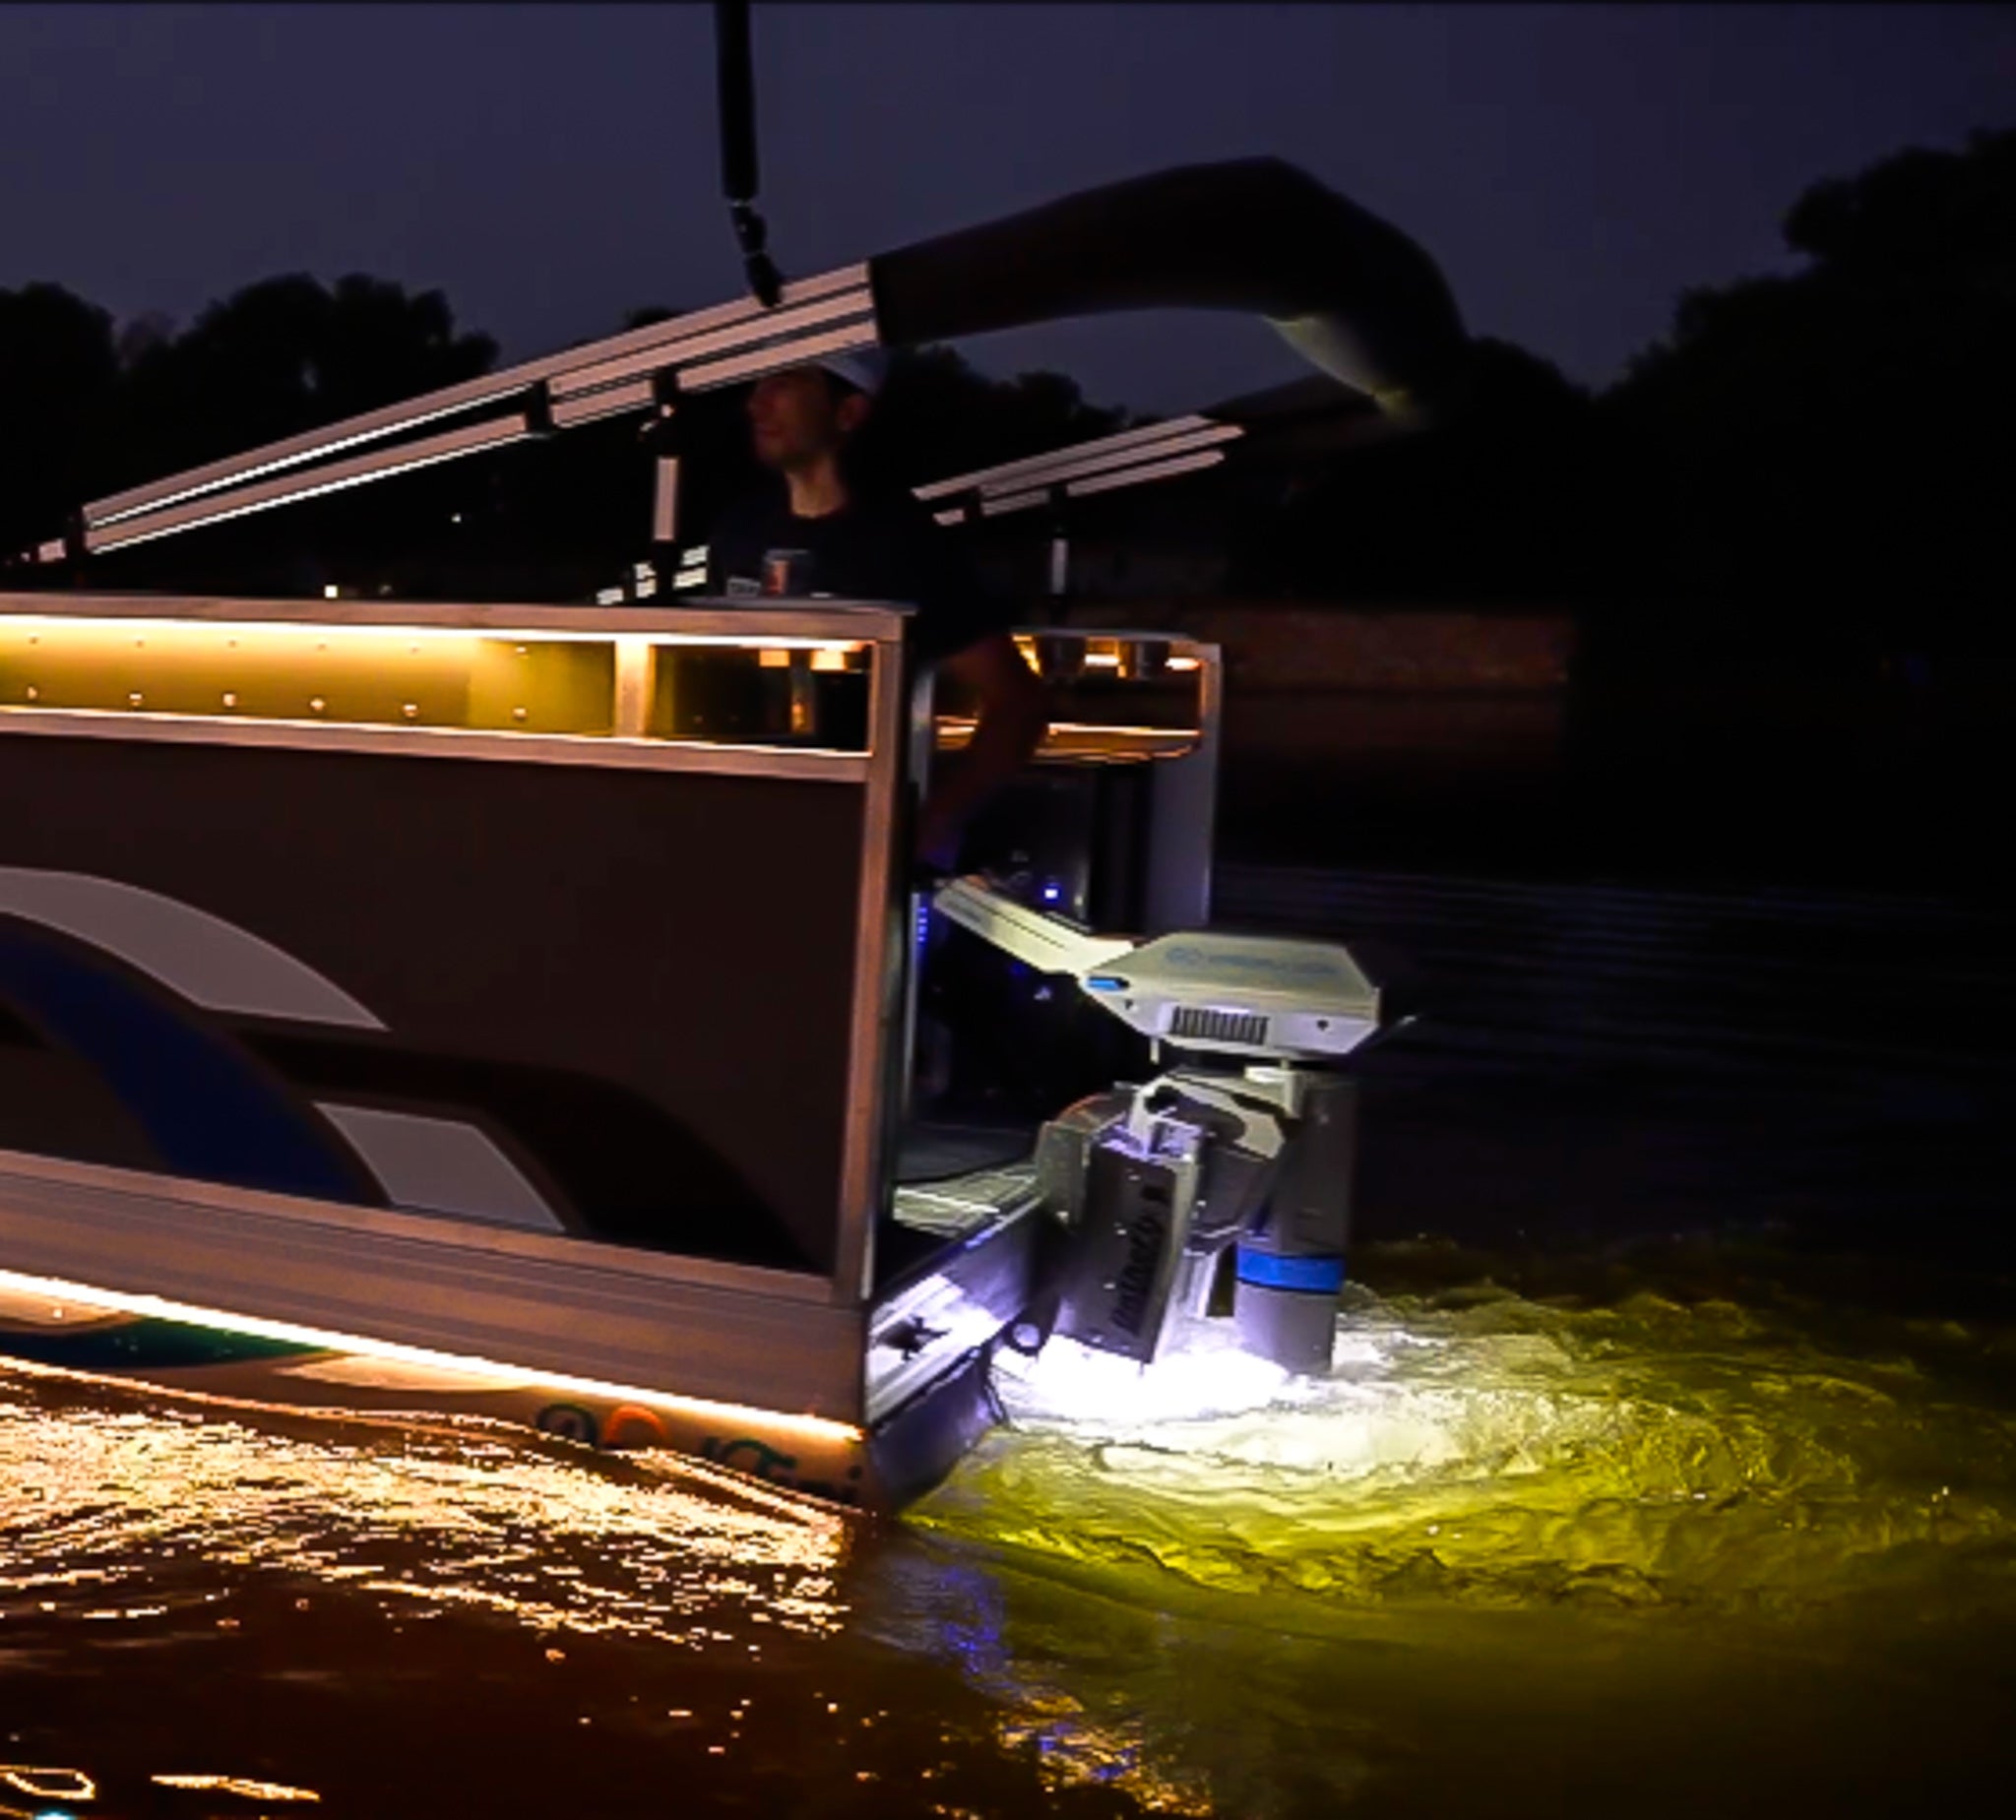 Night Fishing Lights For Boat Products - ECPlaza